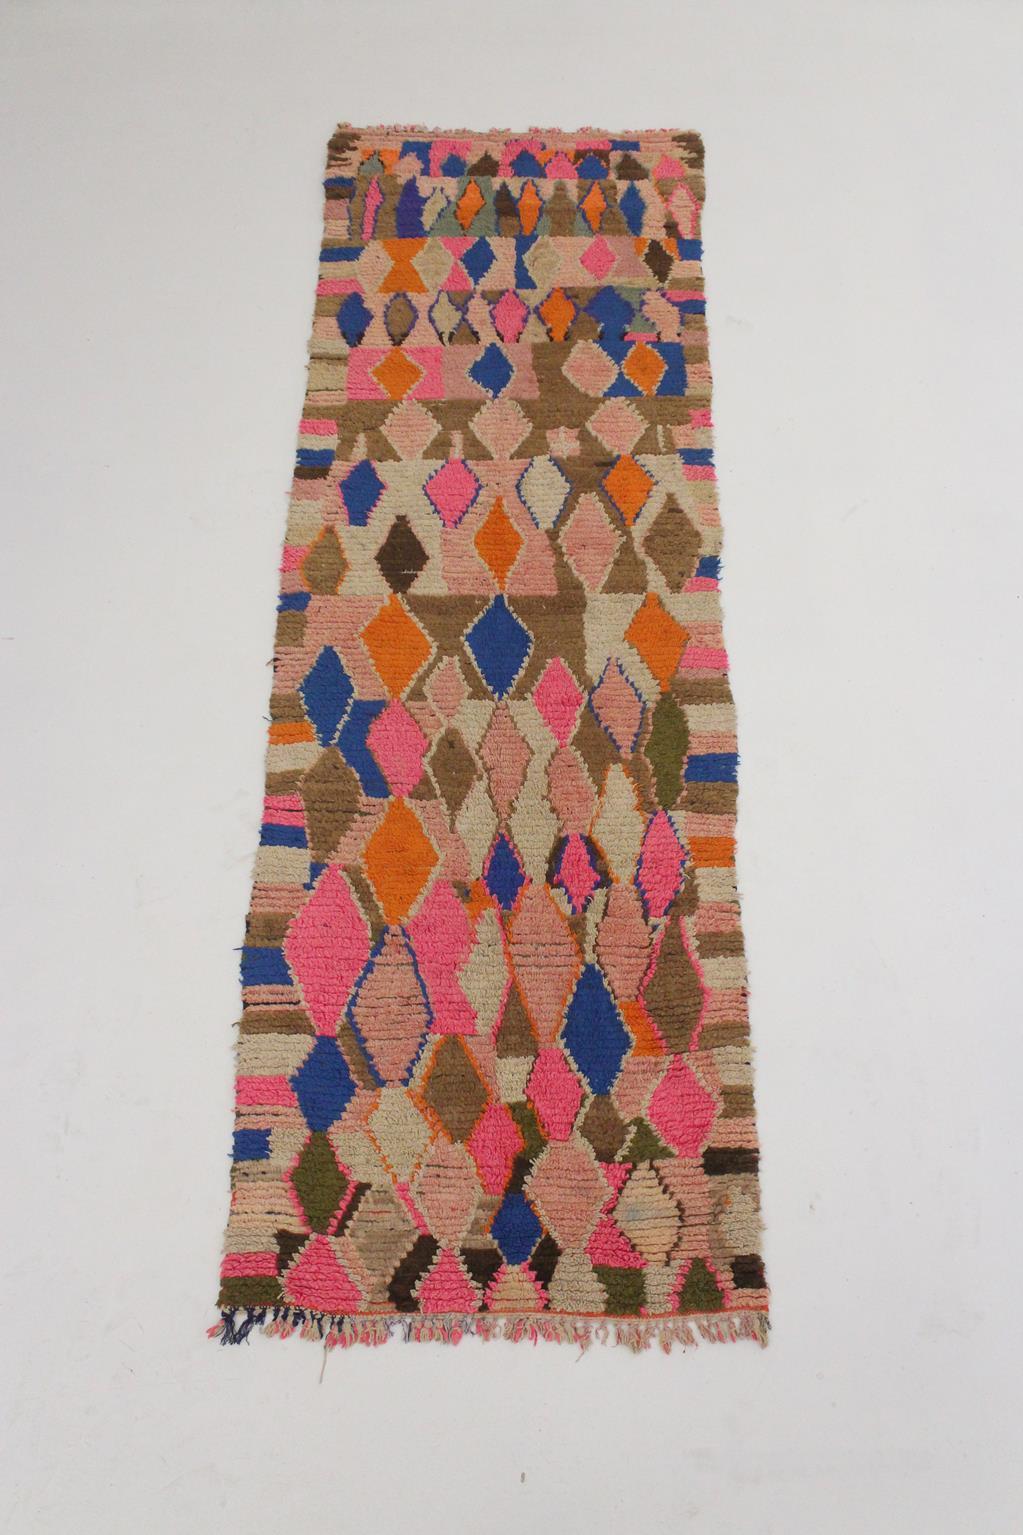 This vintage runner rug will bring the perfect bohemian vibe to your space! The pattern is a 